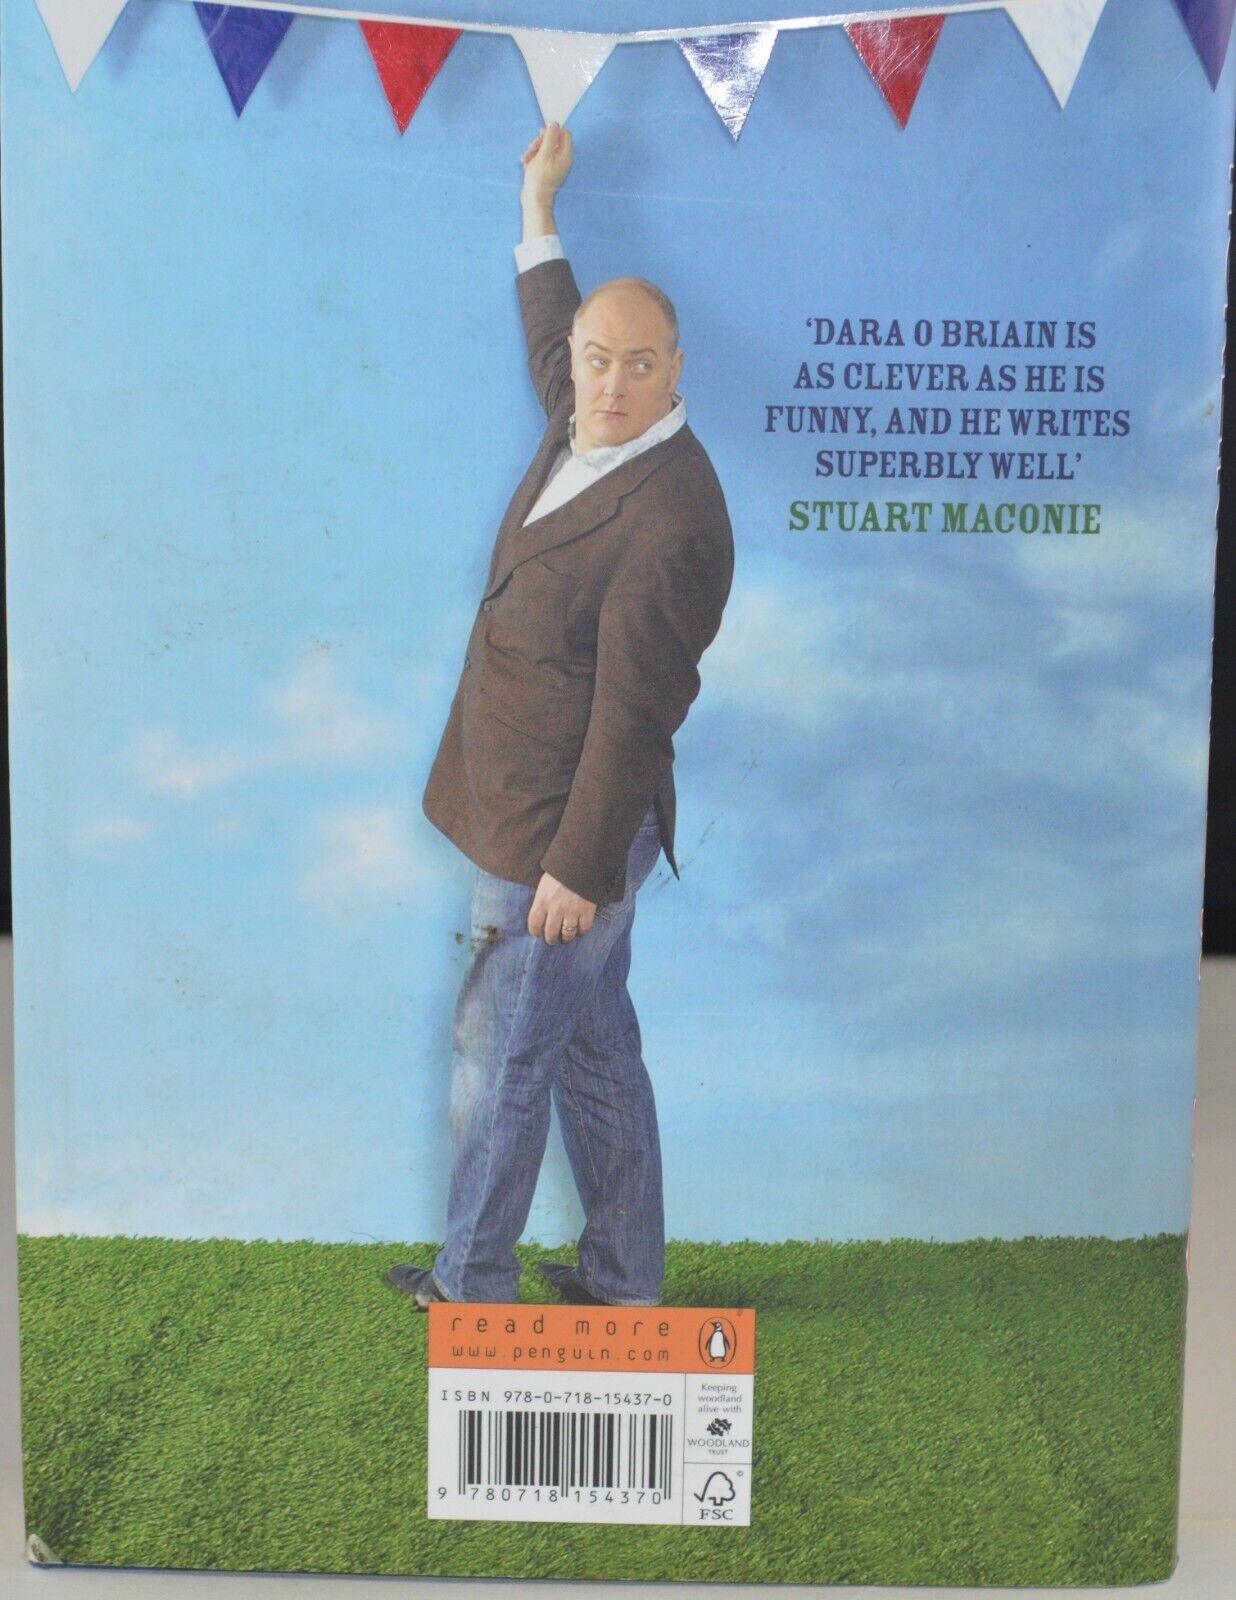 THE THIRD BOOK OF HUMOROUS STORIES & DARA O BRIAIN TICKLING THE ENGLISH - TMD167207